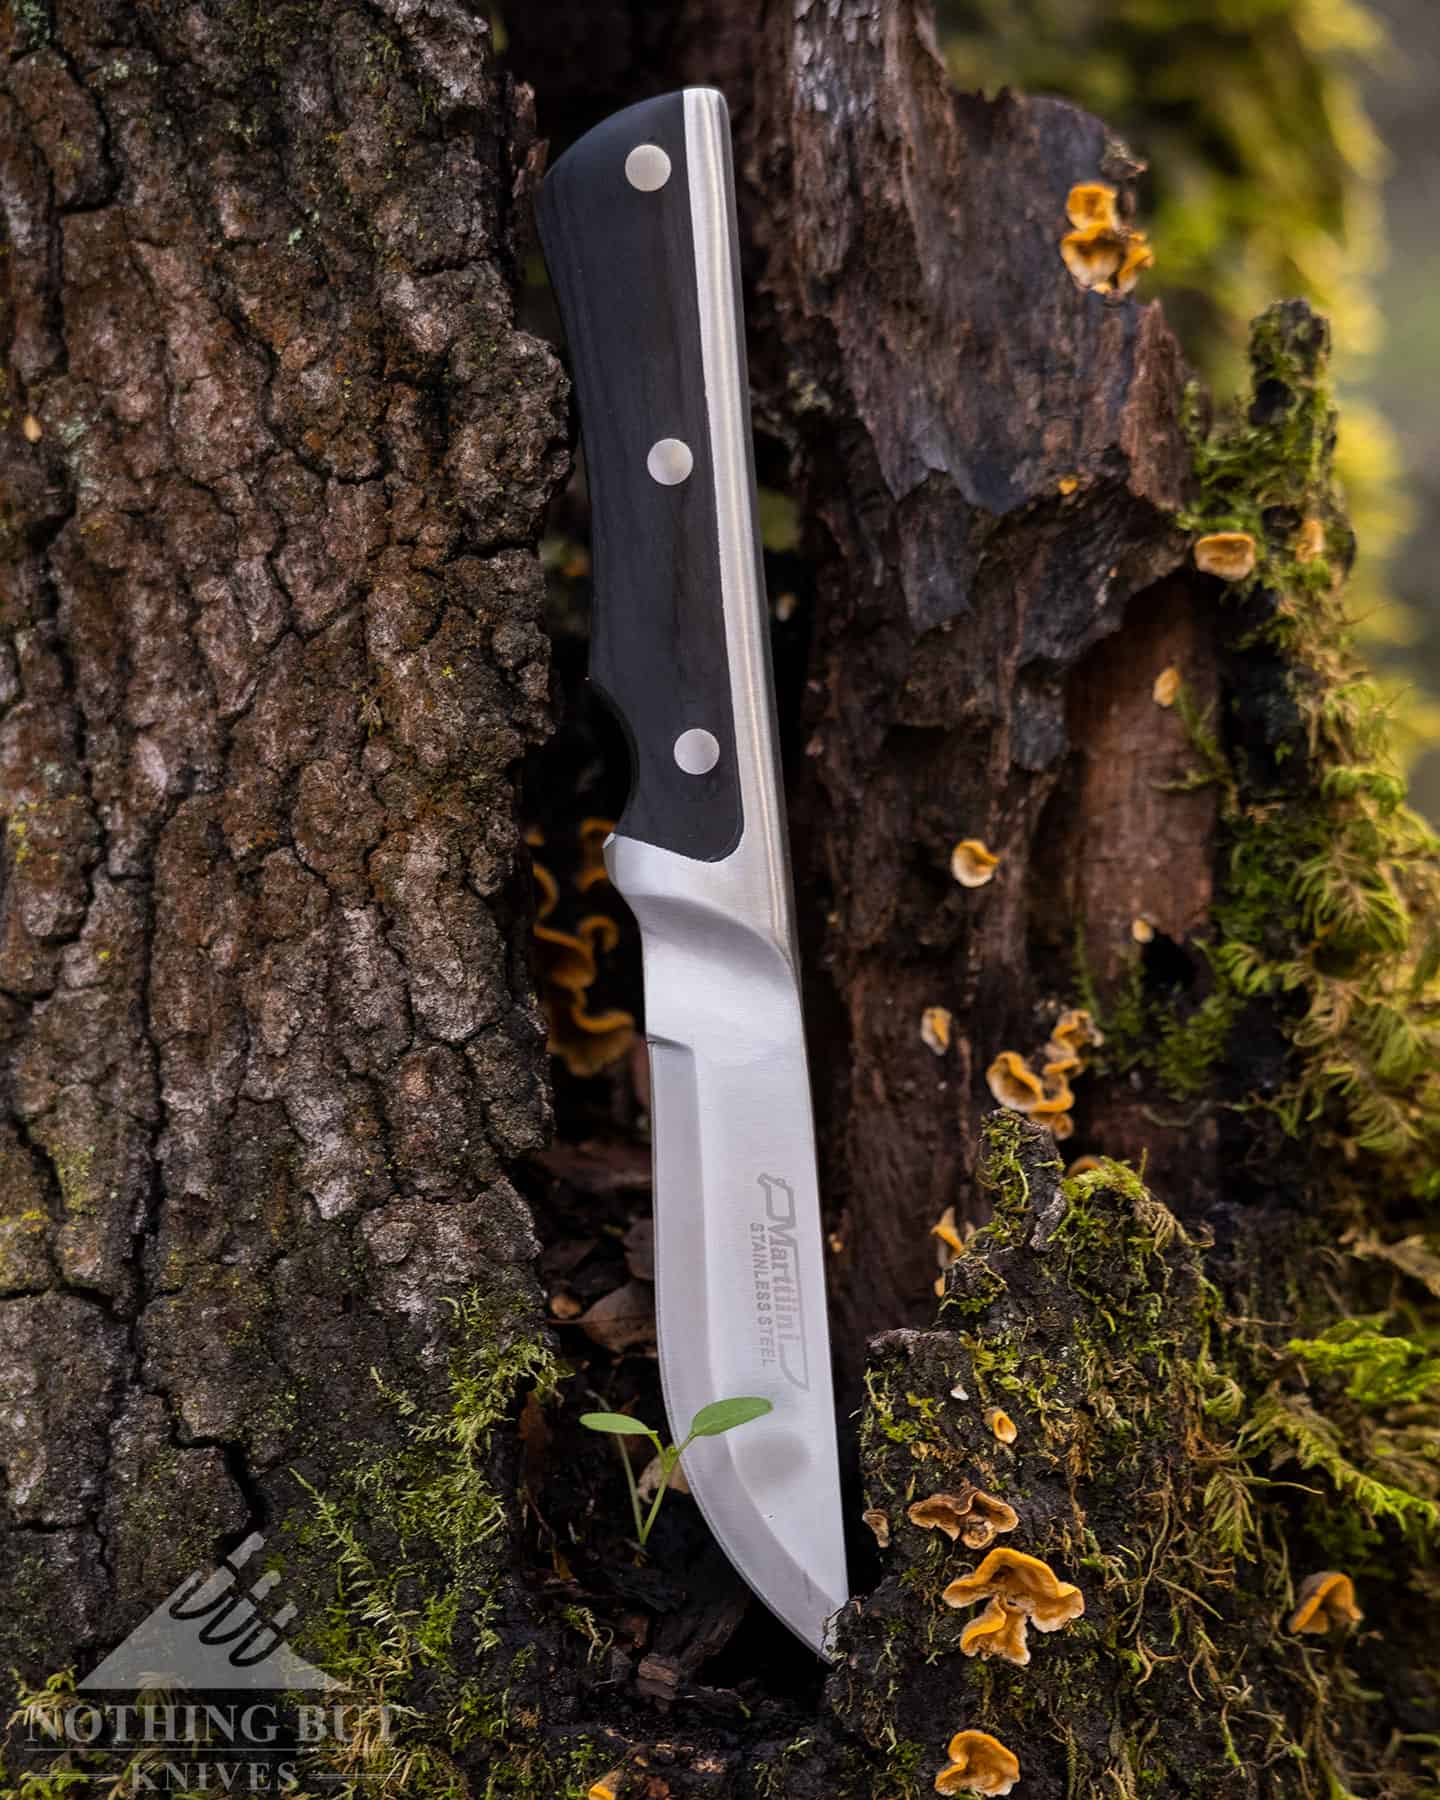 The Marttiini Full Tan is a unique looking knife with an unimaginative name. Shown here in the moss of a tree. 